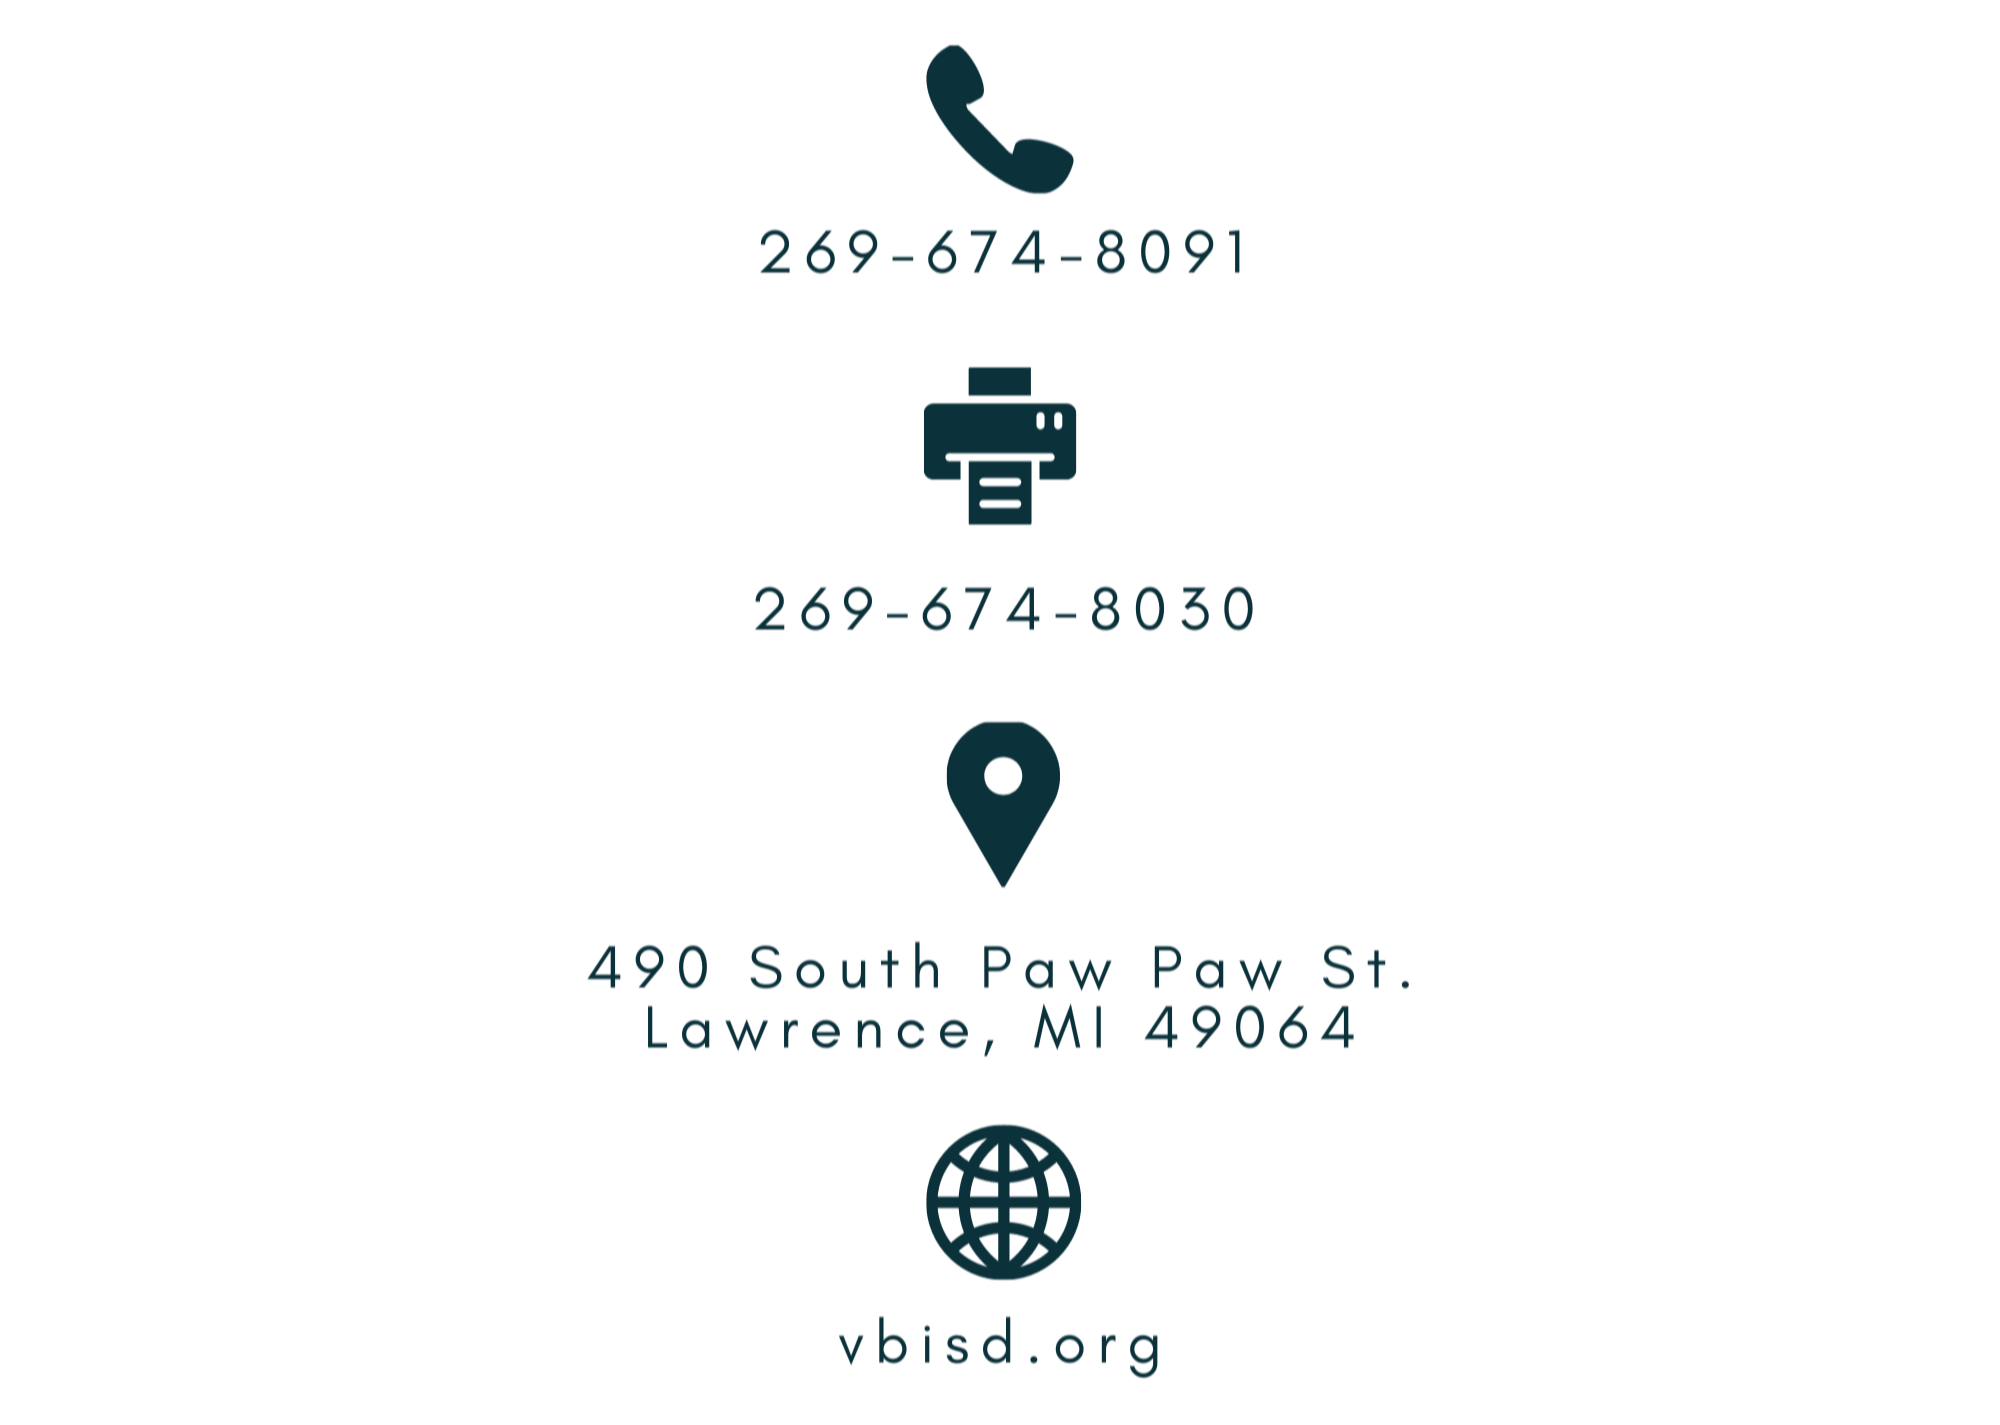 VBISD Contact Information.  Phone - 269-674-8091. Fax - 269-674-8030.  Address - 490 South Paw Paw St., Lawrence , MI 49064.  Website - vbisd.org